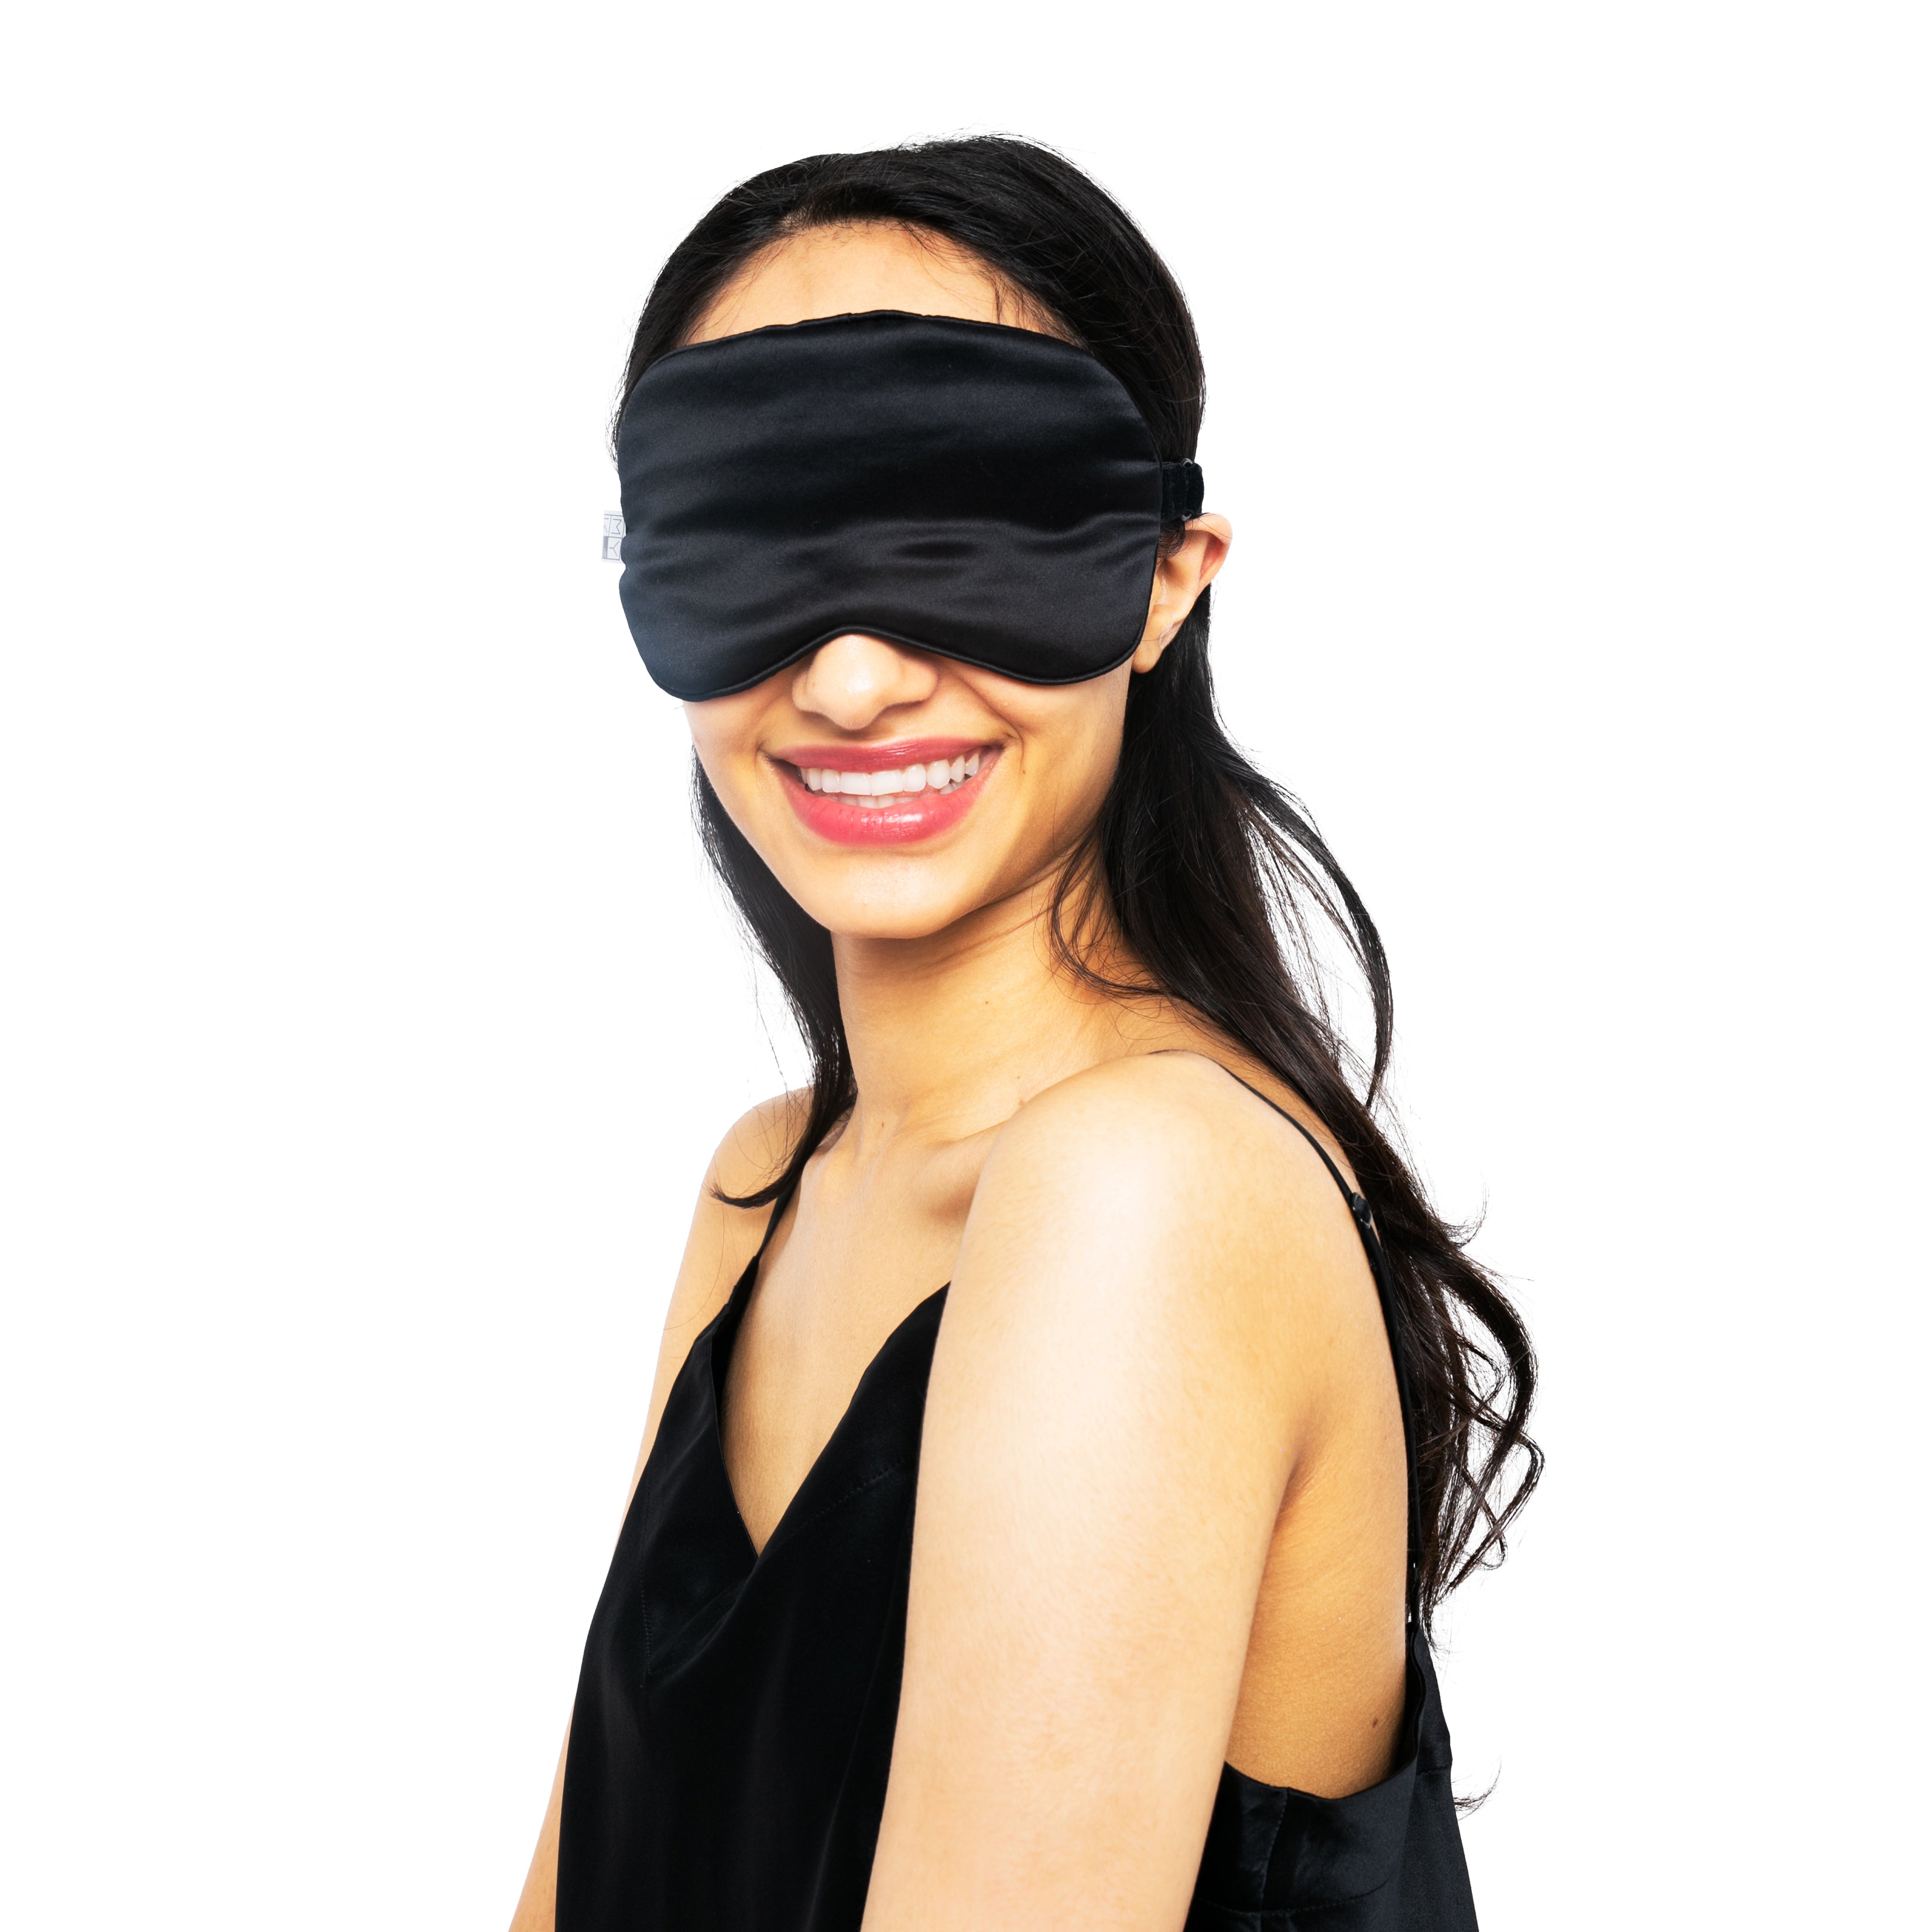 MYK Silk Sleeping Eyemask Filled with Pure Mulberry Silk Napping Blindfold for Sleeping Travel Eye Mask with Adjustable Strap for Comfort Black